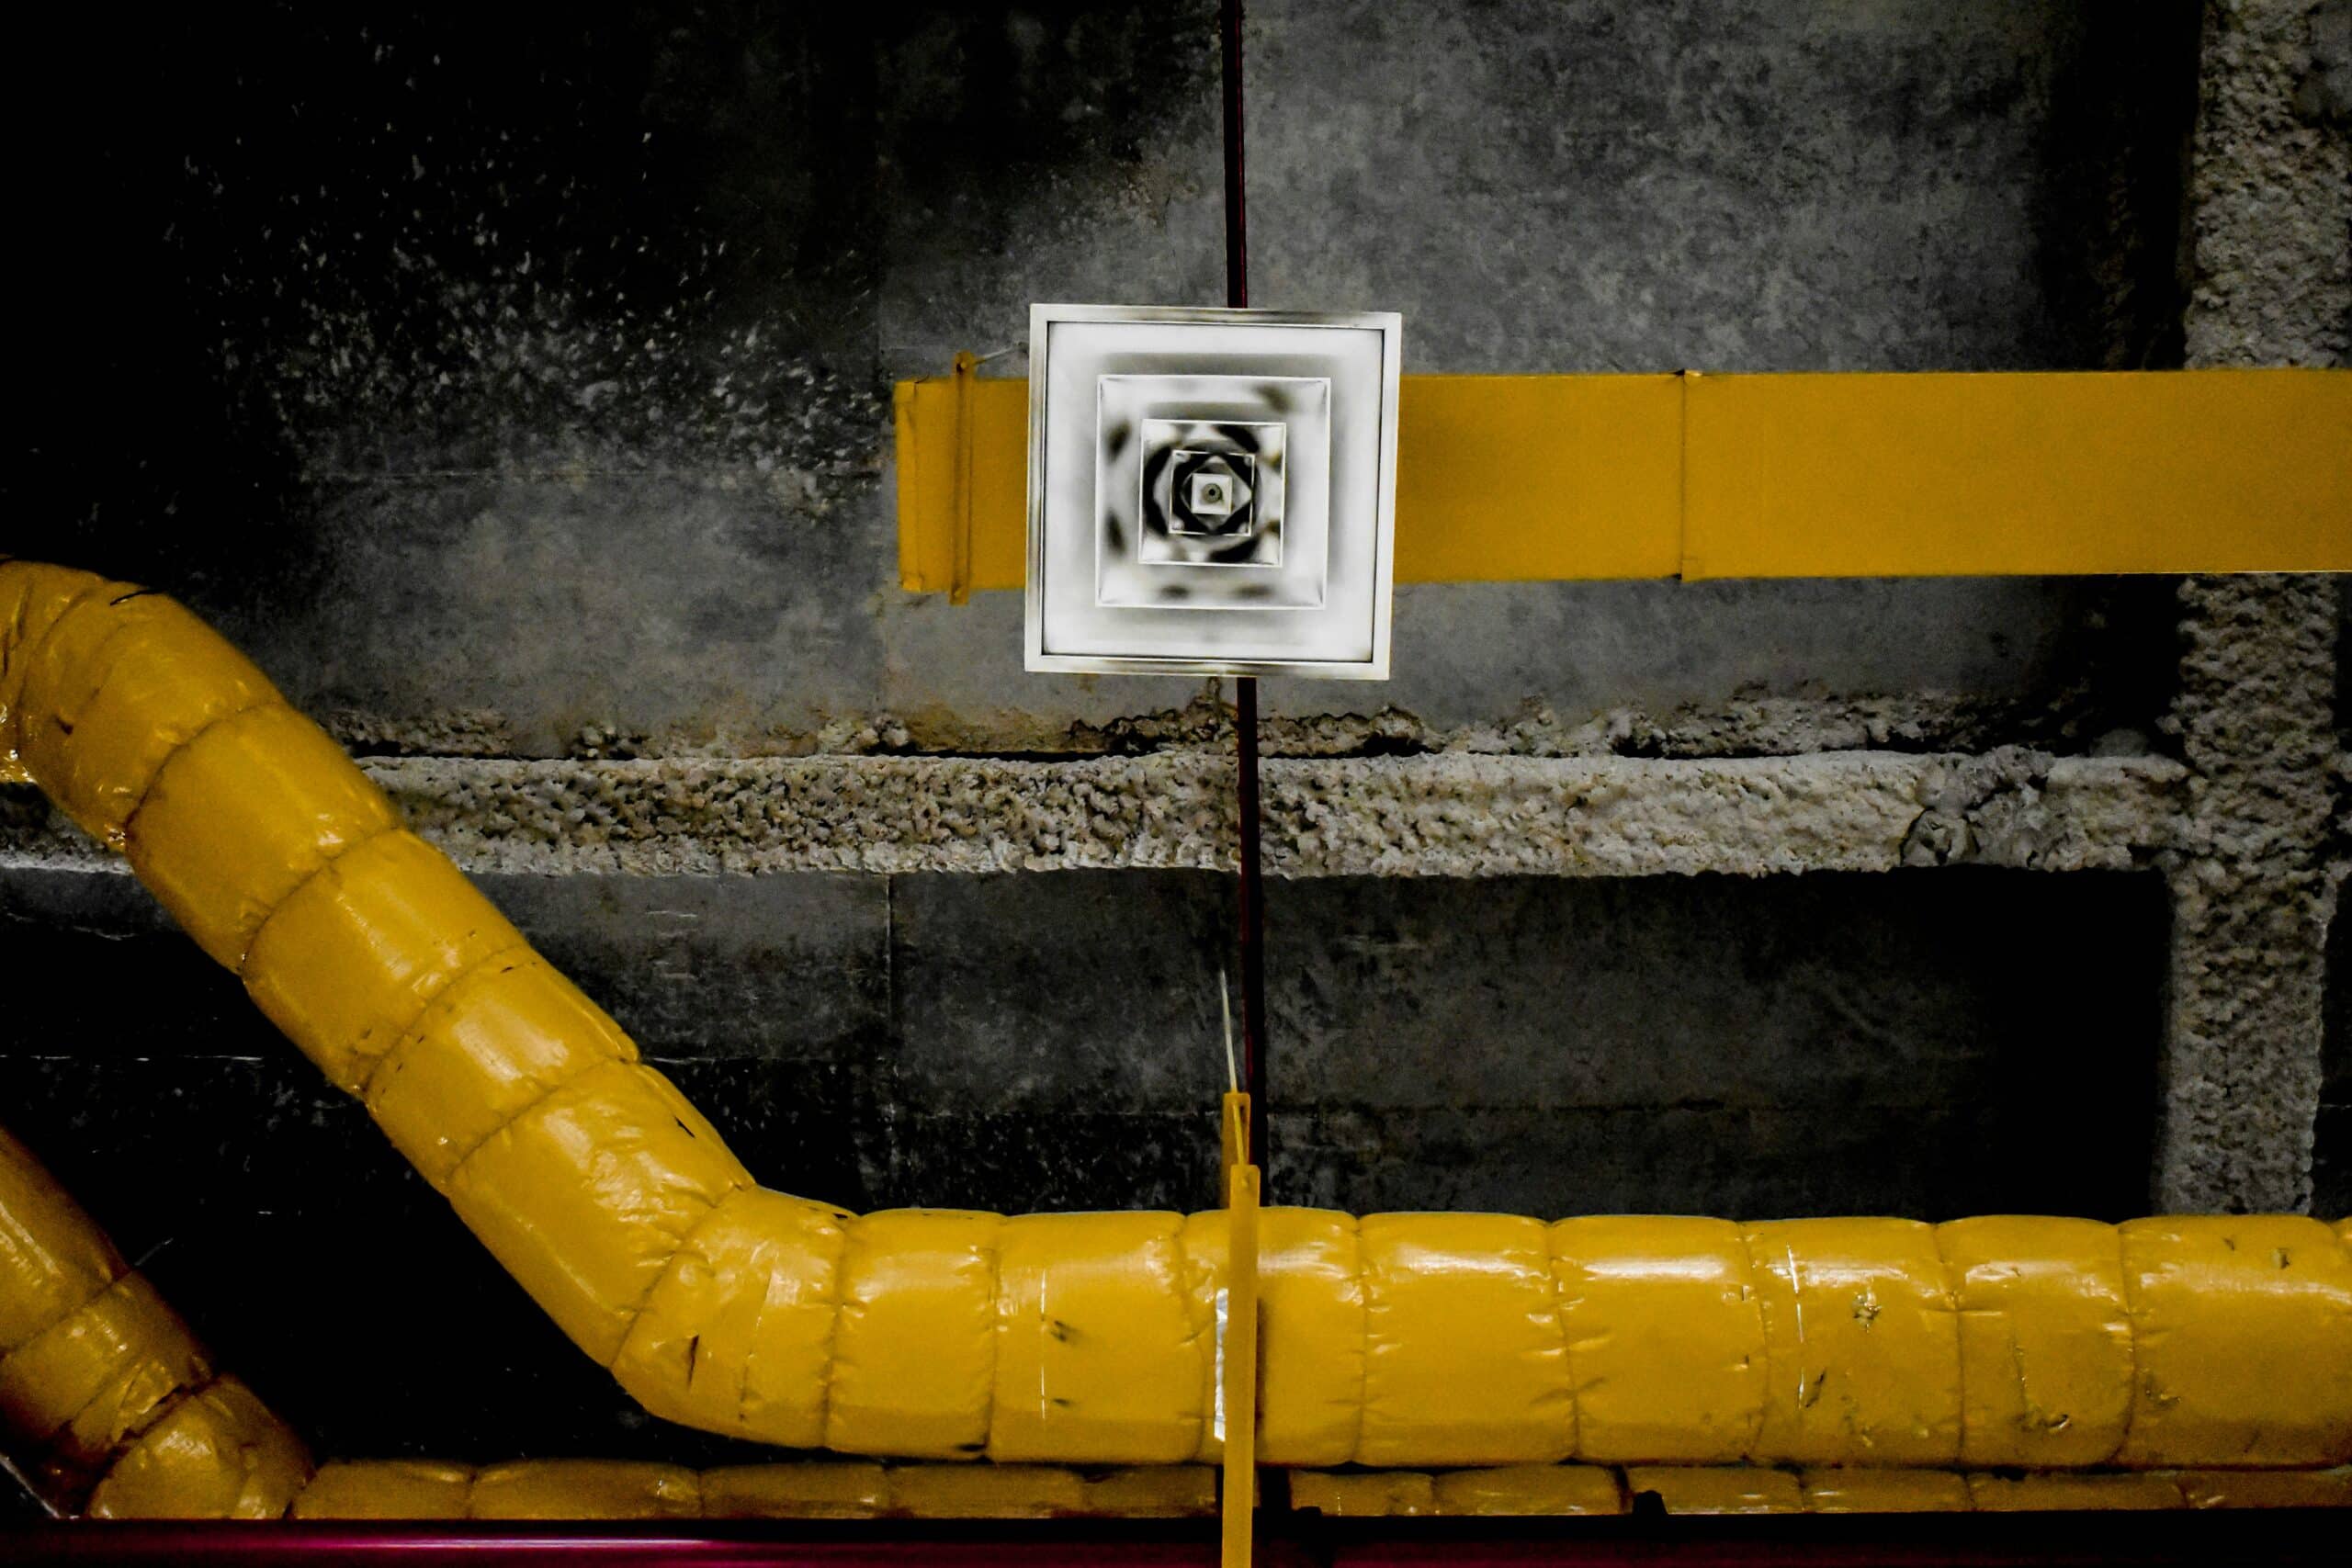 Ventilation duct and air vent in an industrial confined space, indicative of the complex environments Detroit Confined Space Emergency Response teams operate in.